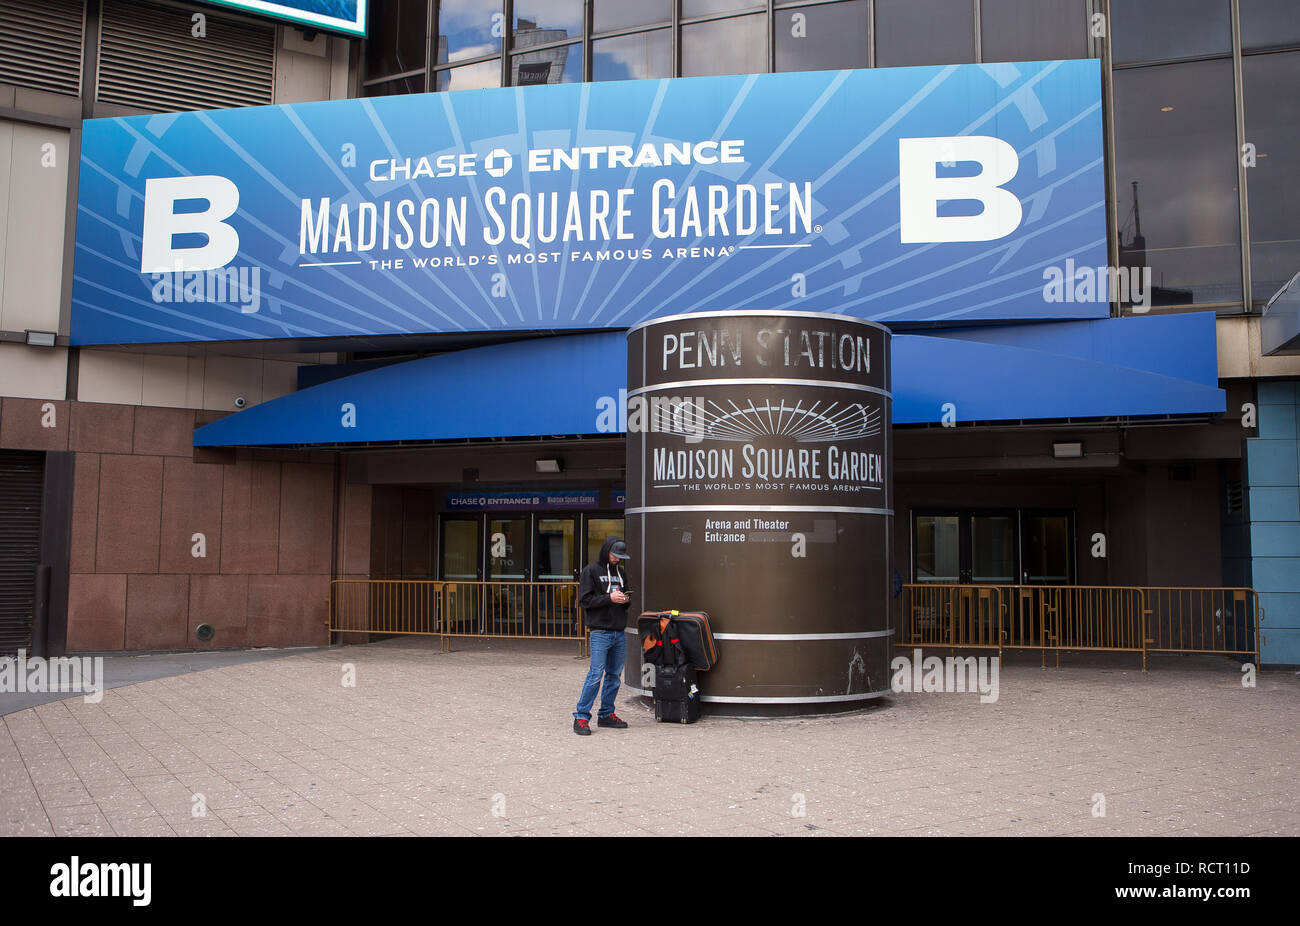 General View Gv Of Madison Square Garden With The Entrance To